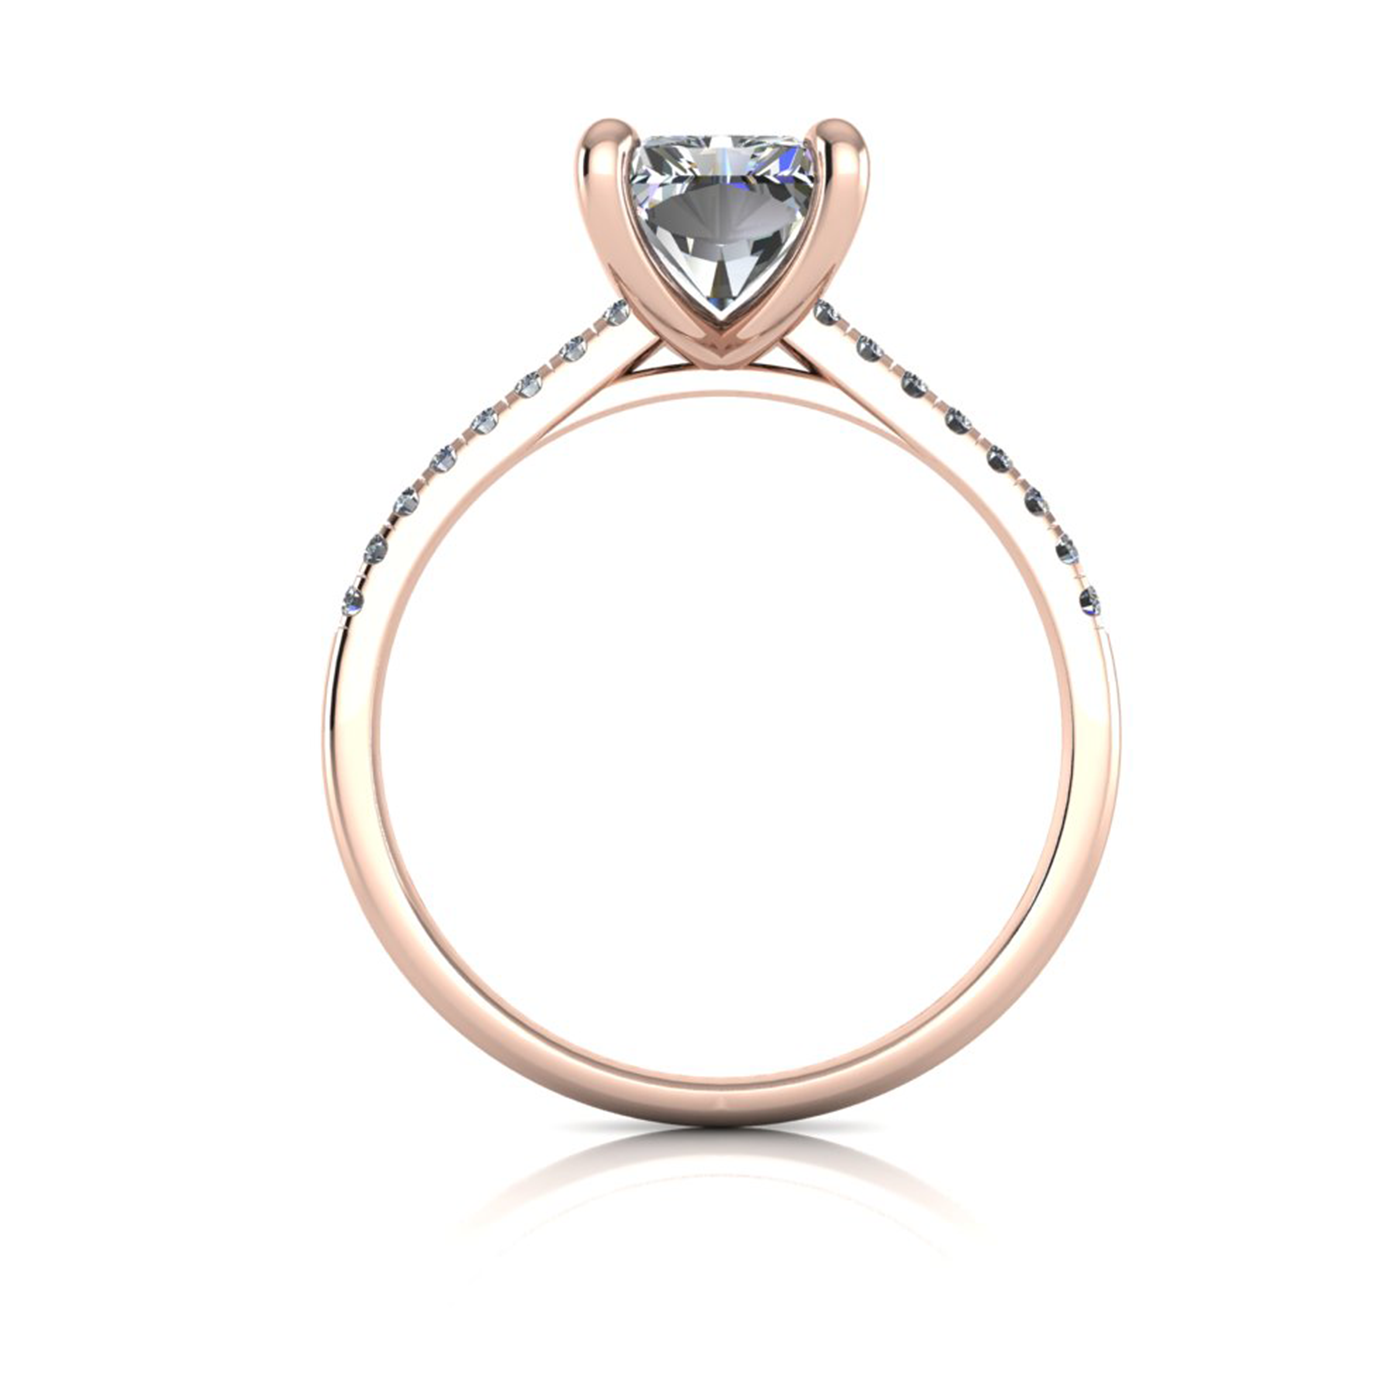 18k rose gold  2,00 ct 4 prongs radiant cut diamond engagement ring with whisper thin pavÉ set band